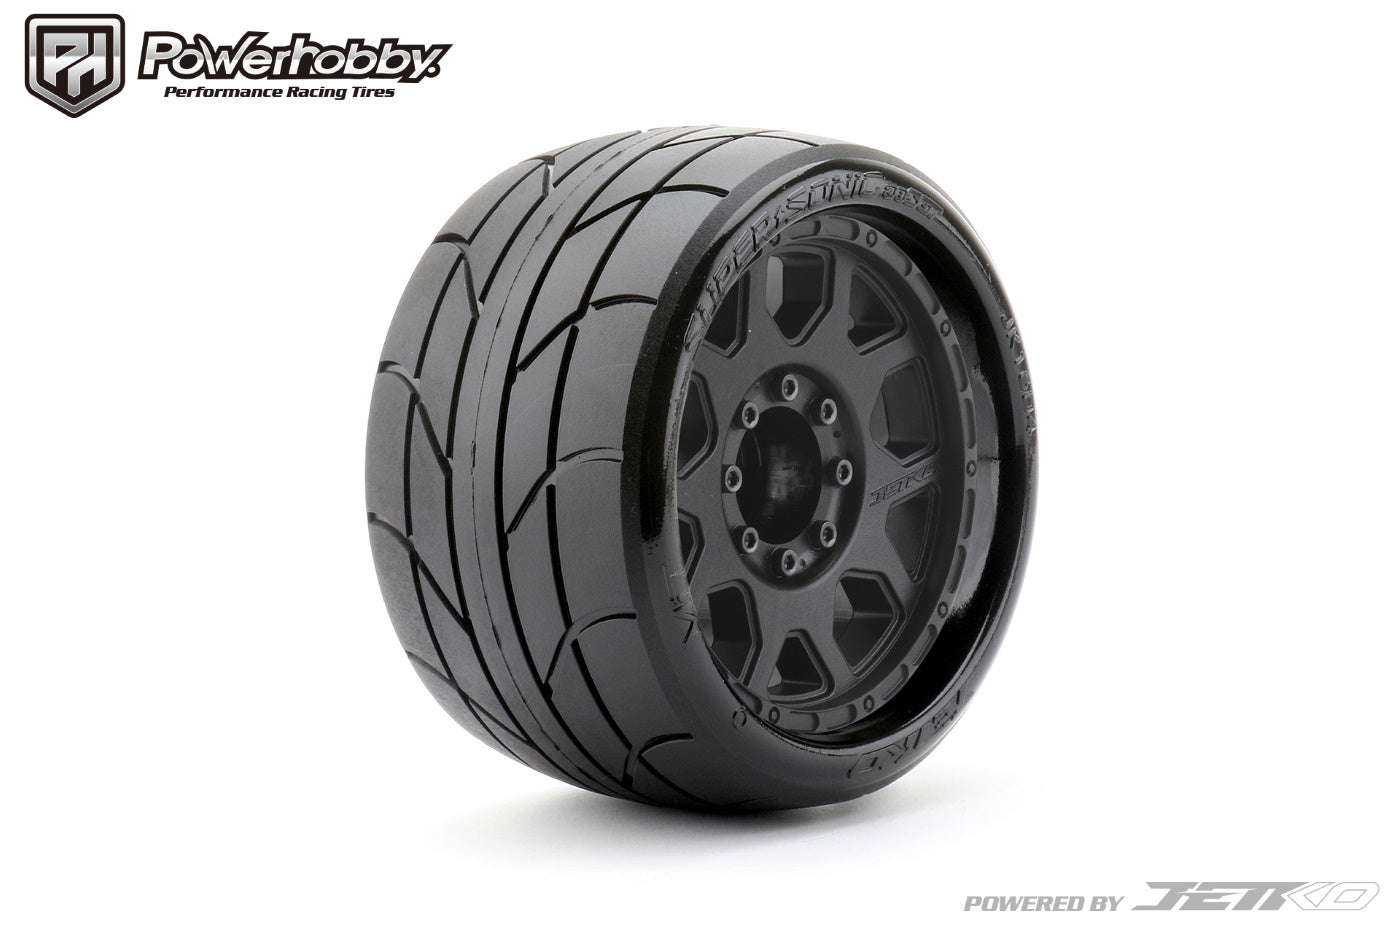 Powerhobby 1/8 SGT 3.8 Super Sonic Belted Mounted Tires w Removable Hex Wheels (2) - PowerHobby